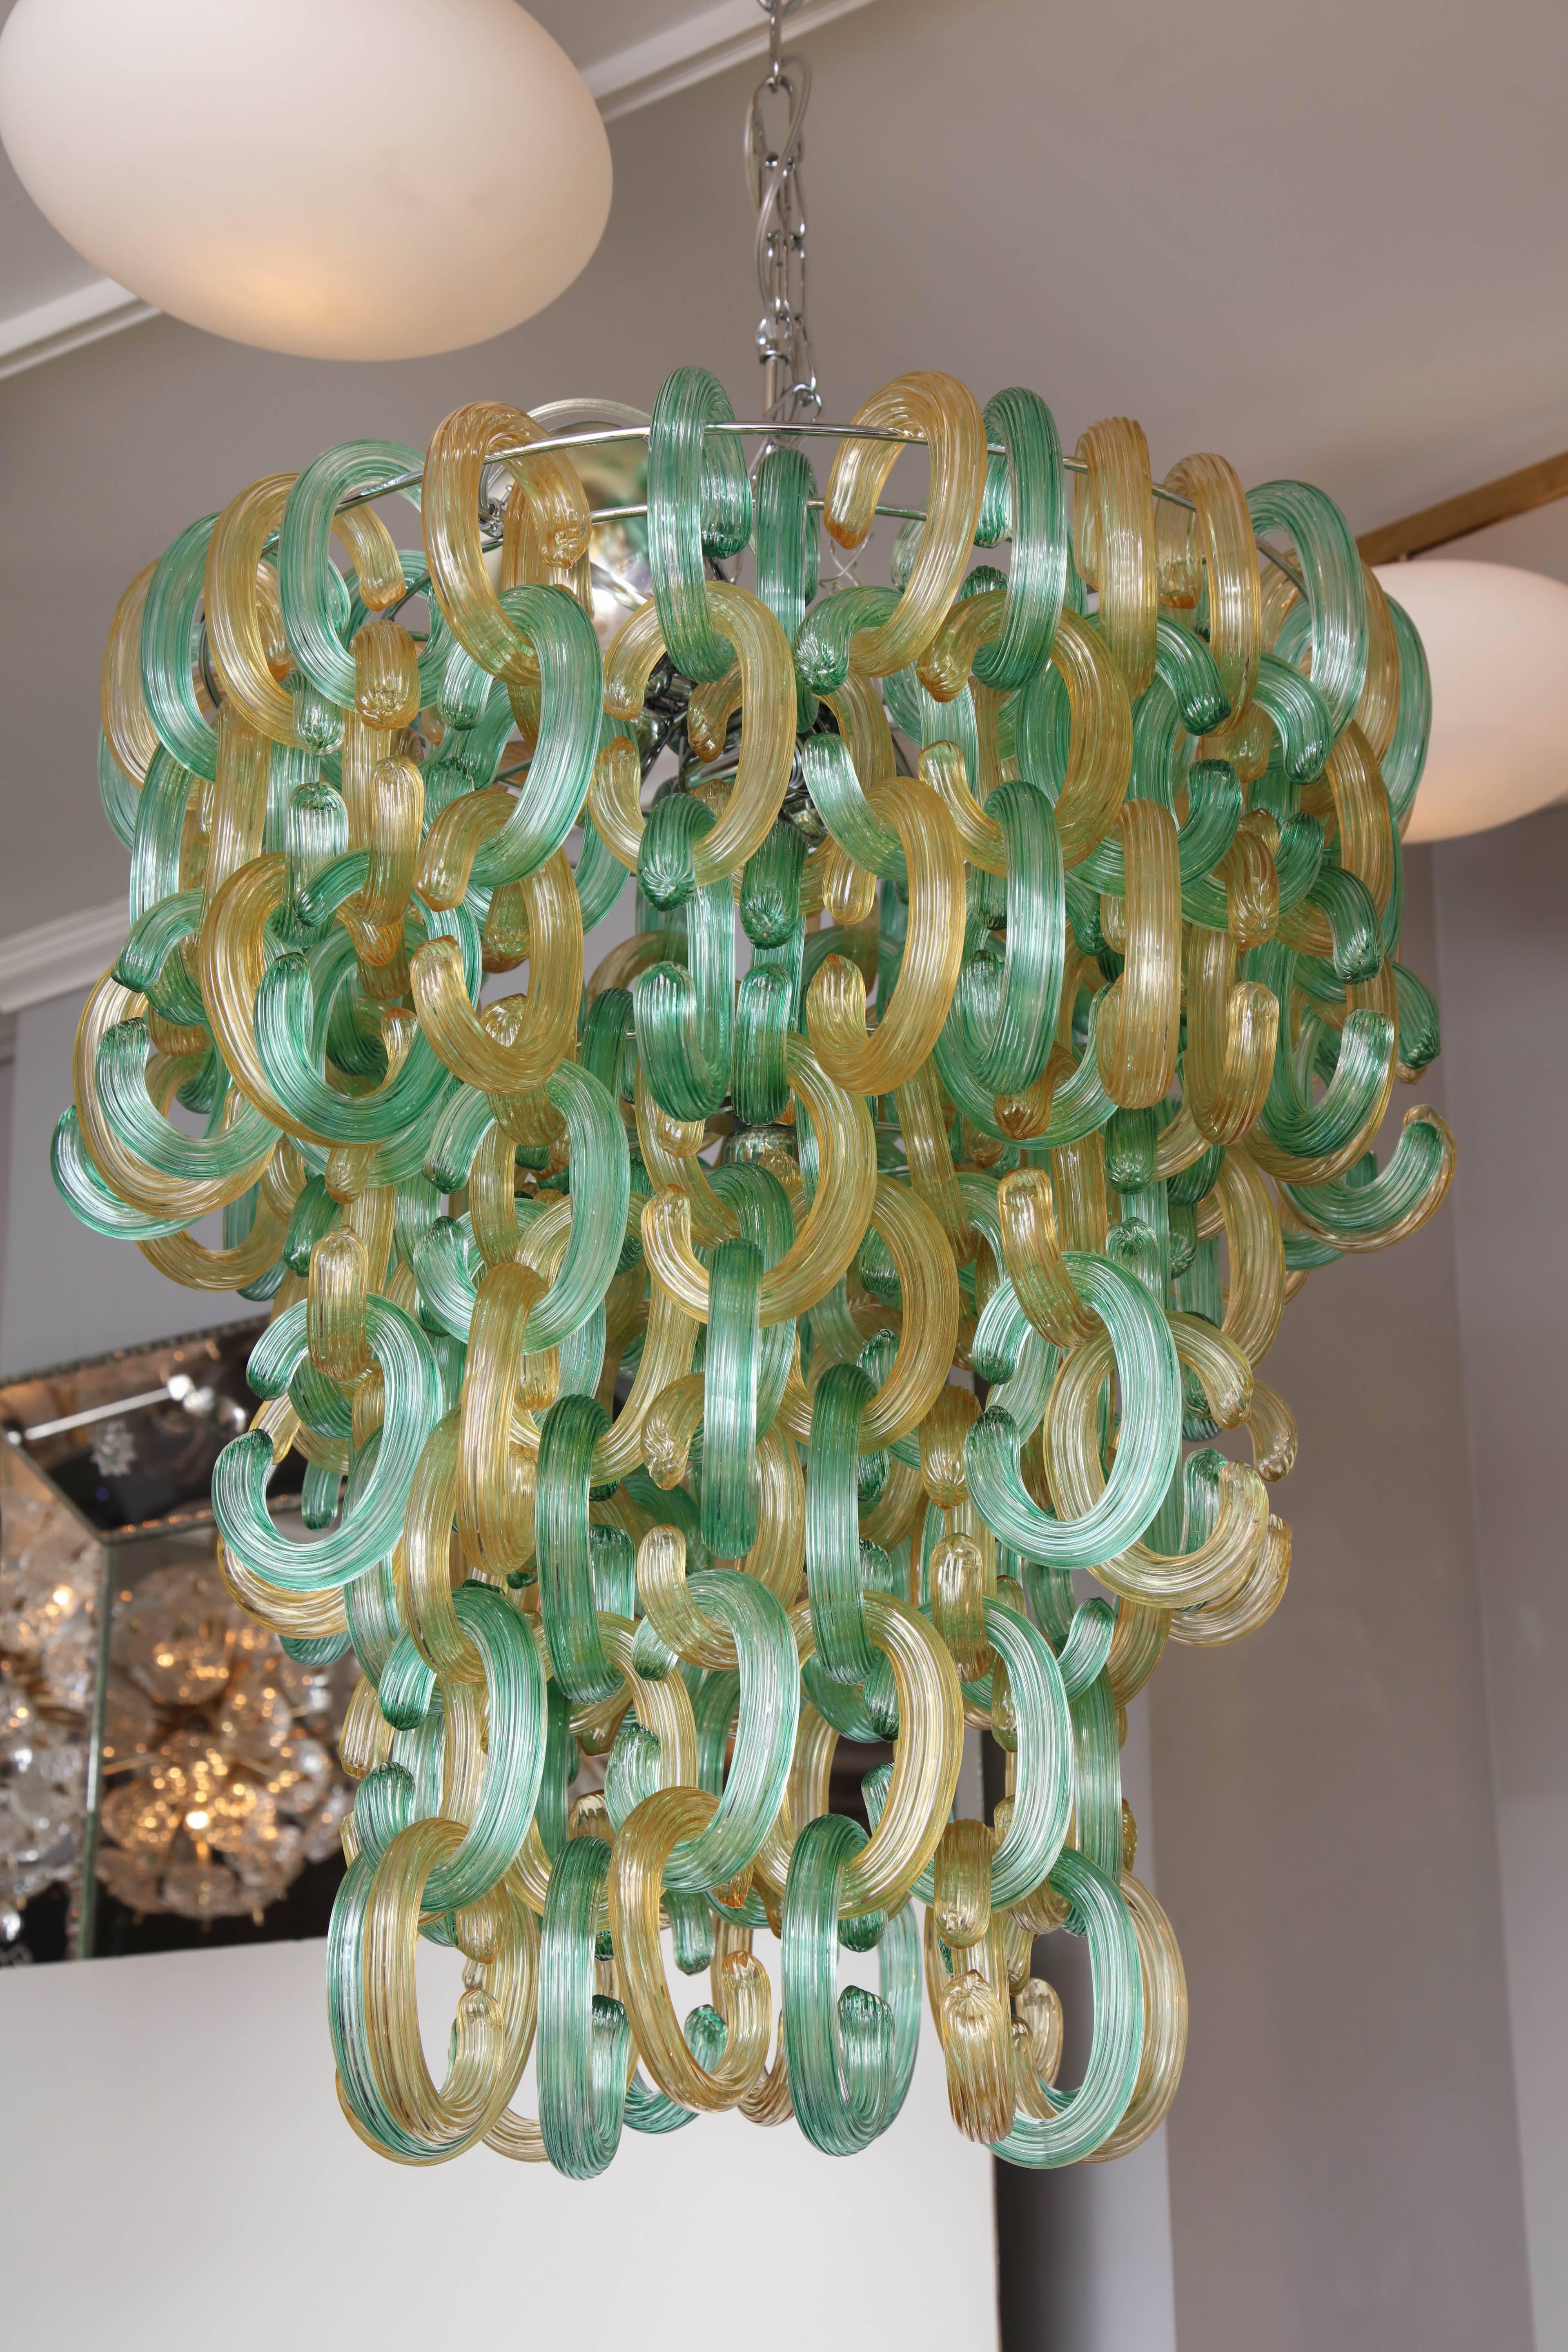 Green and gold Murano C-link glass chandelier. This is a floor model chandelier on sale.